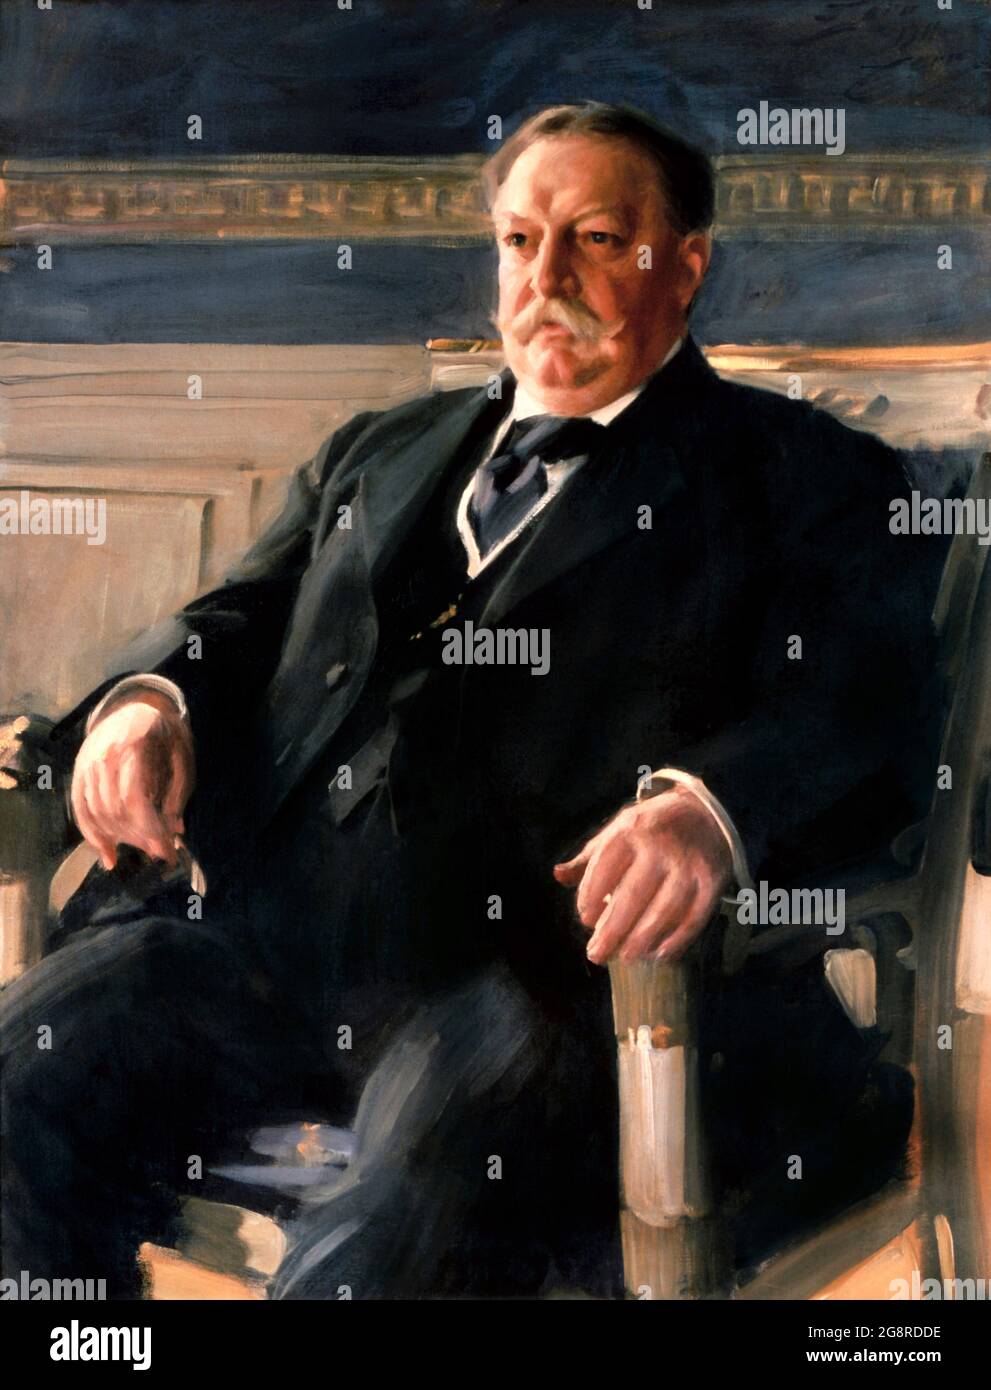 William Howard Taft. Portrait of the 27th President of the USA, William Howard Taft (1857-1930) by Anders Zorn, oil on canvas, 1911 Stock Photo